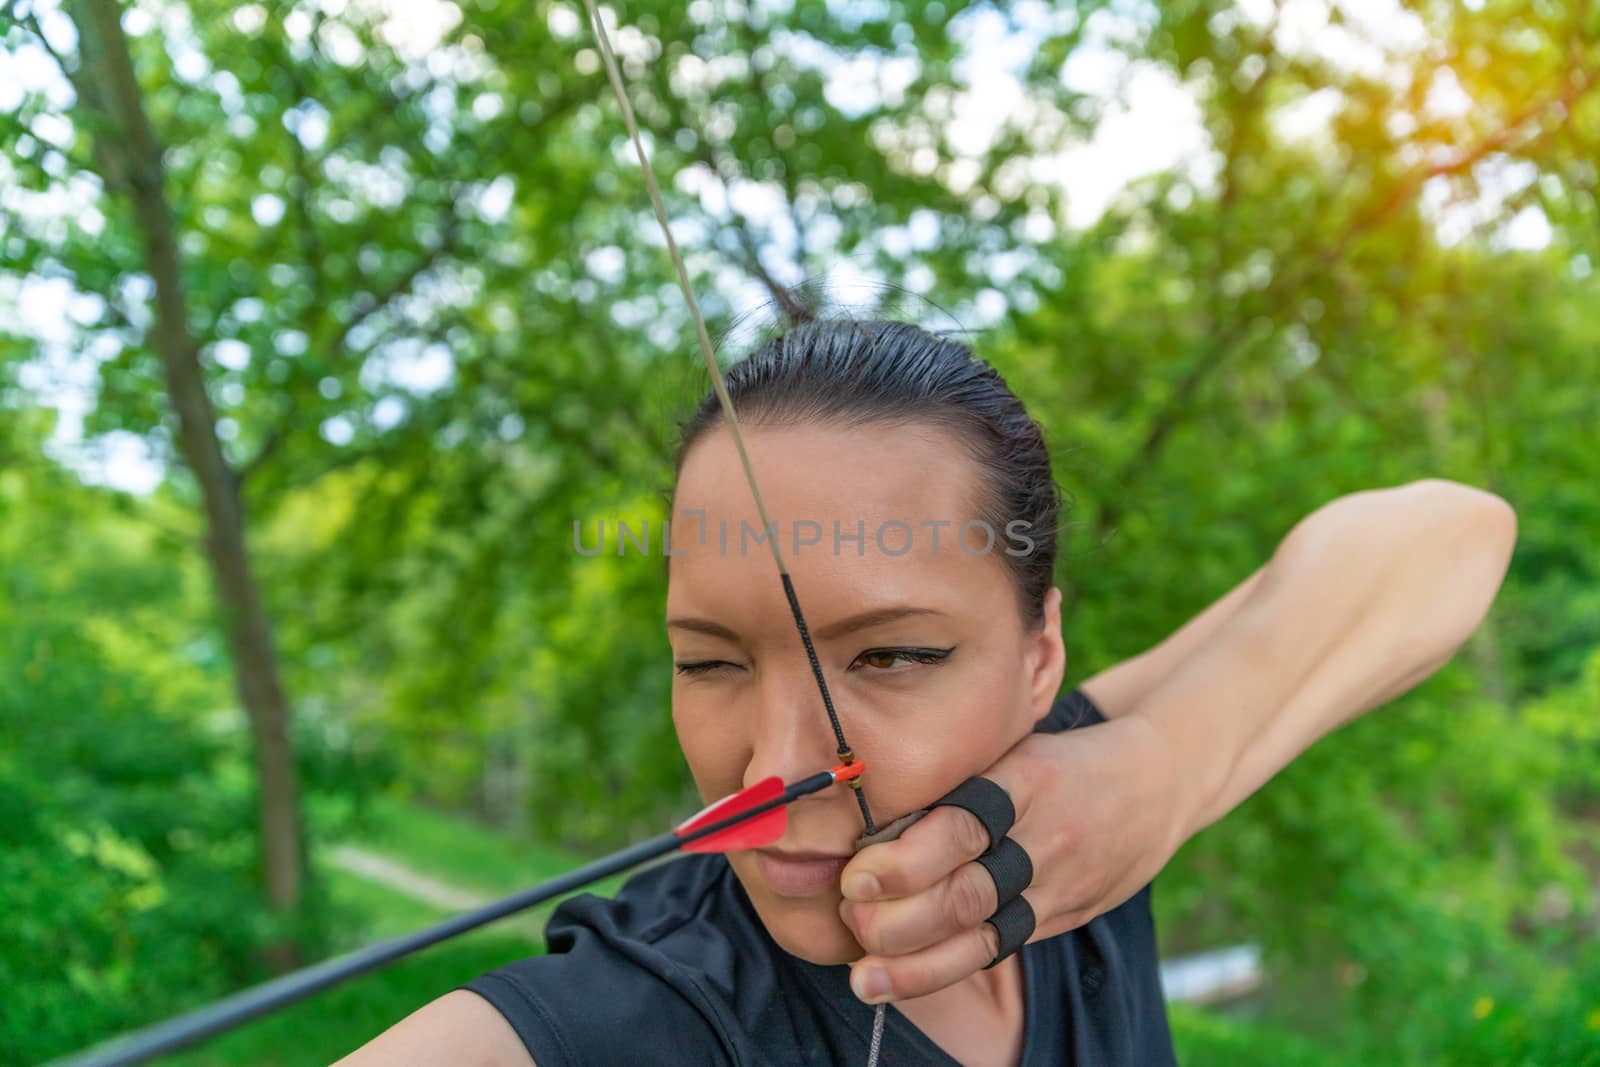 archery, young woman with an arrow in a bow focused on hitting a target.